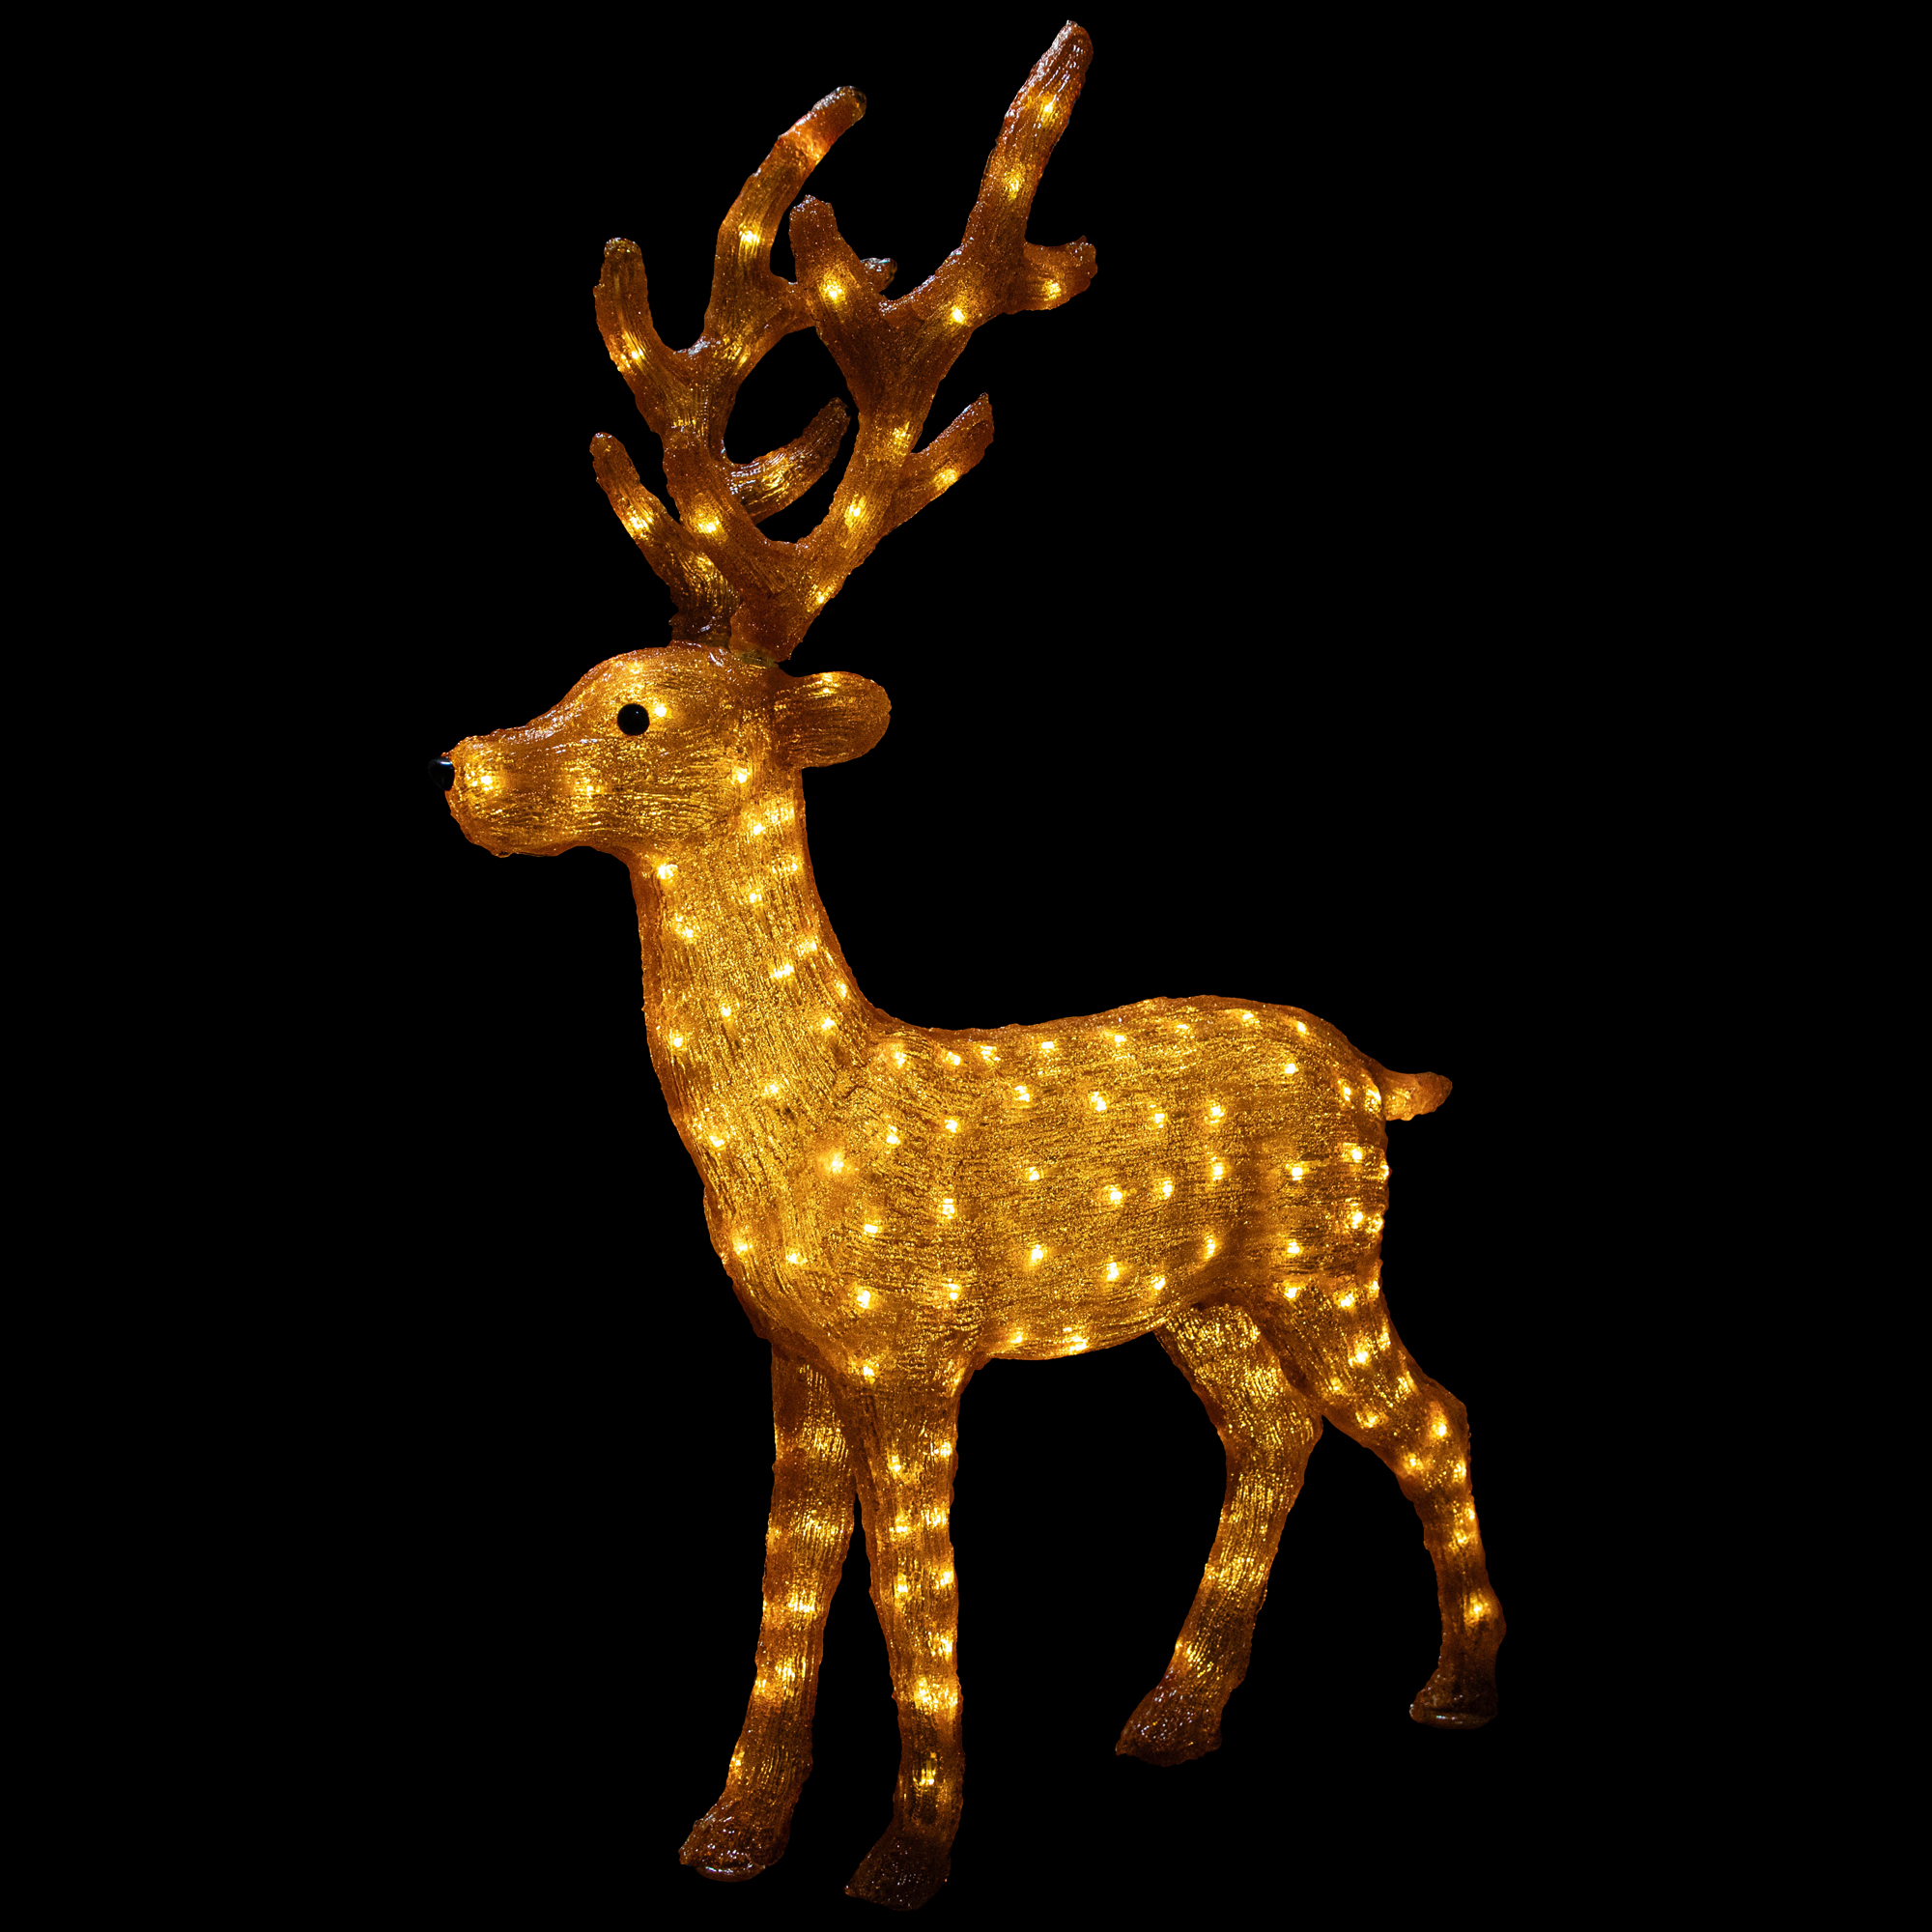 Northlight LED Lighted Commercial Grade Acrylic Reindeer Outdoor Christmas Decoration - 46"